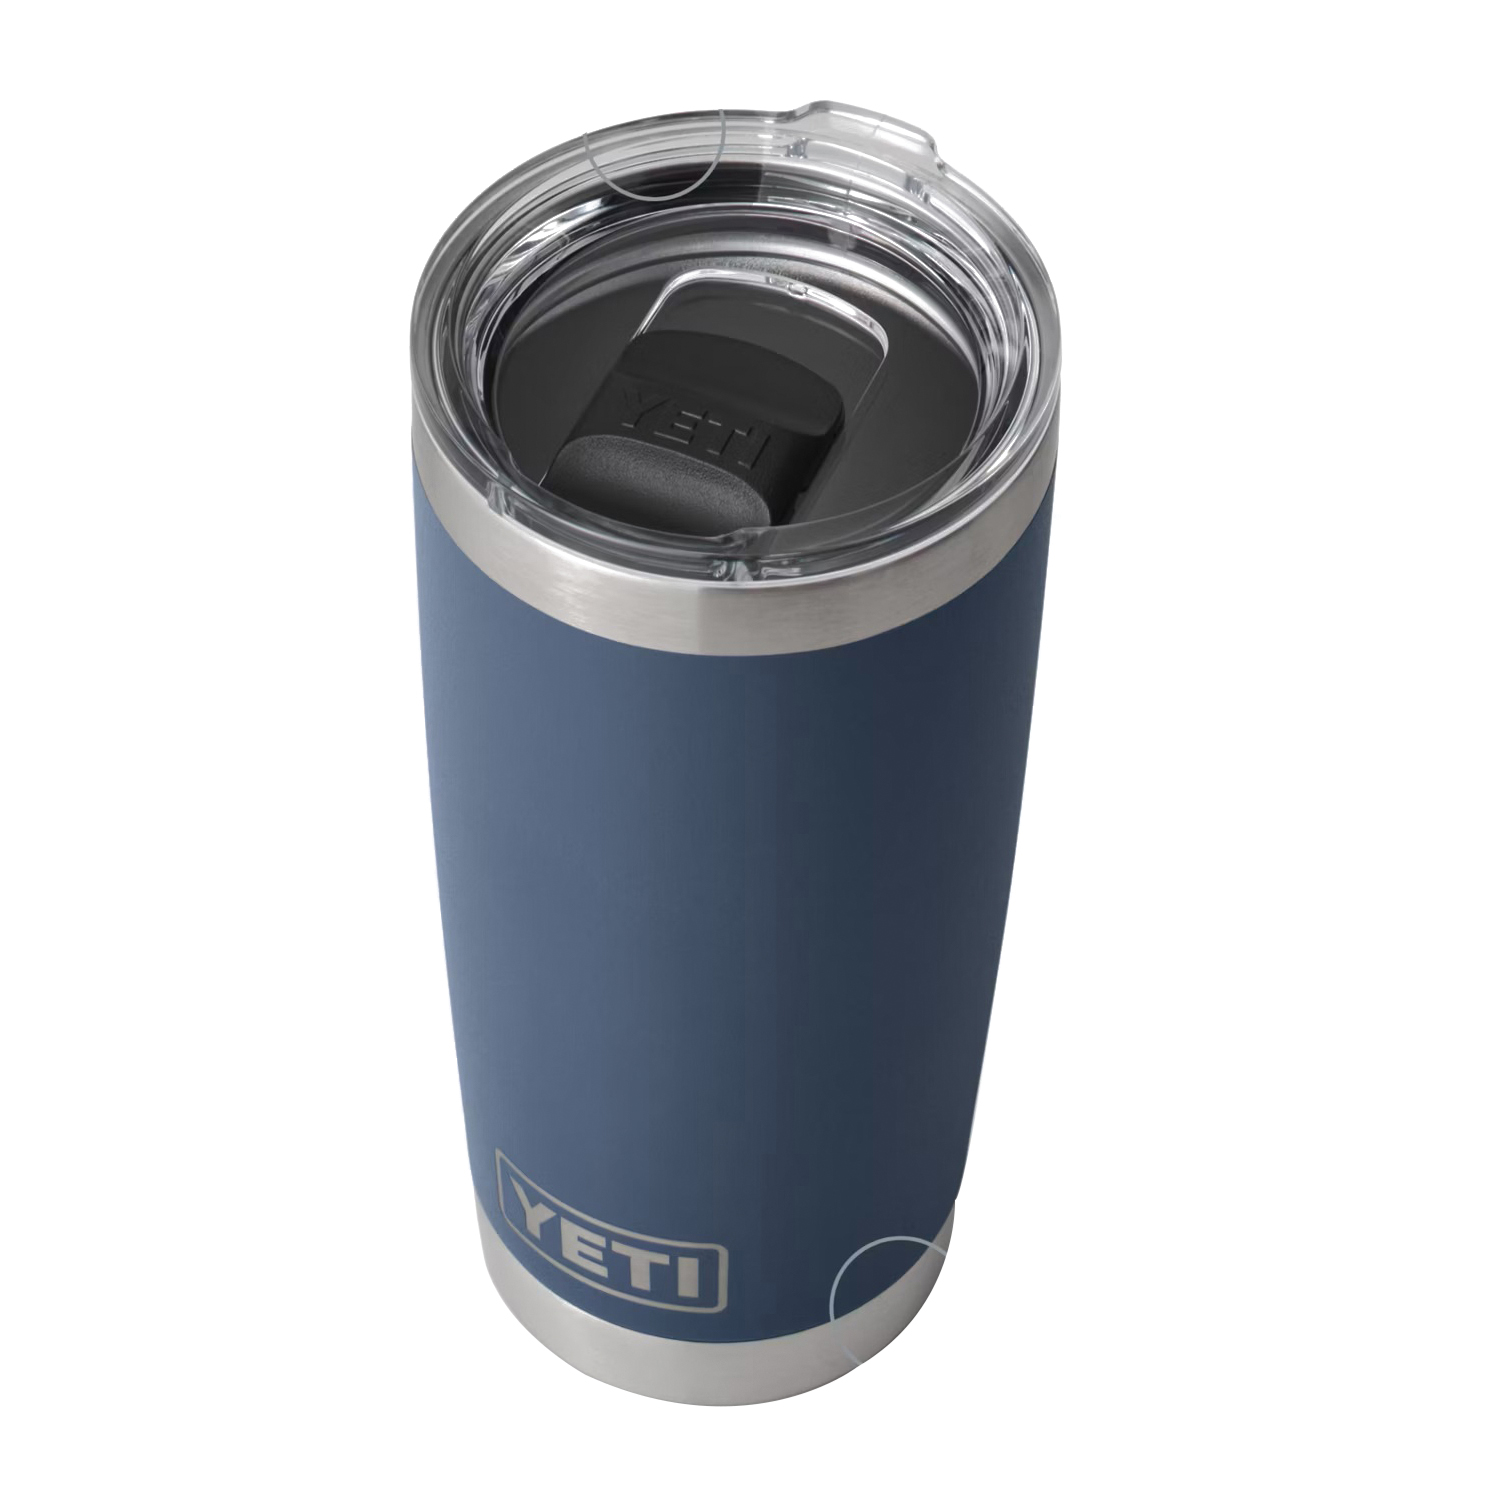 Yeti Rambler 21070060029 Tumbler, 20 oz Capacity, MagSlider Lid, Stainless Steel, Navy, Insulated - 1